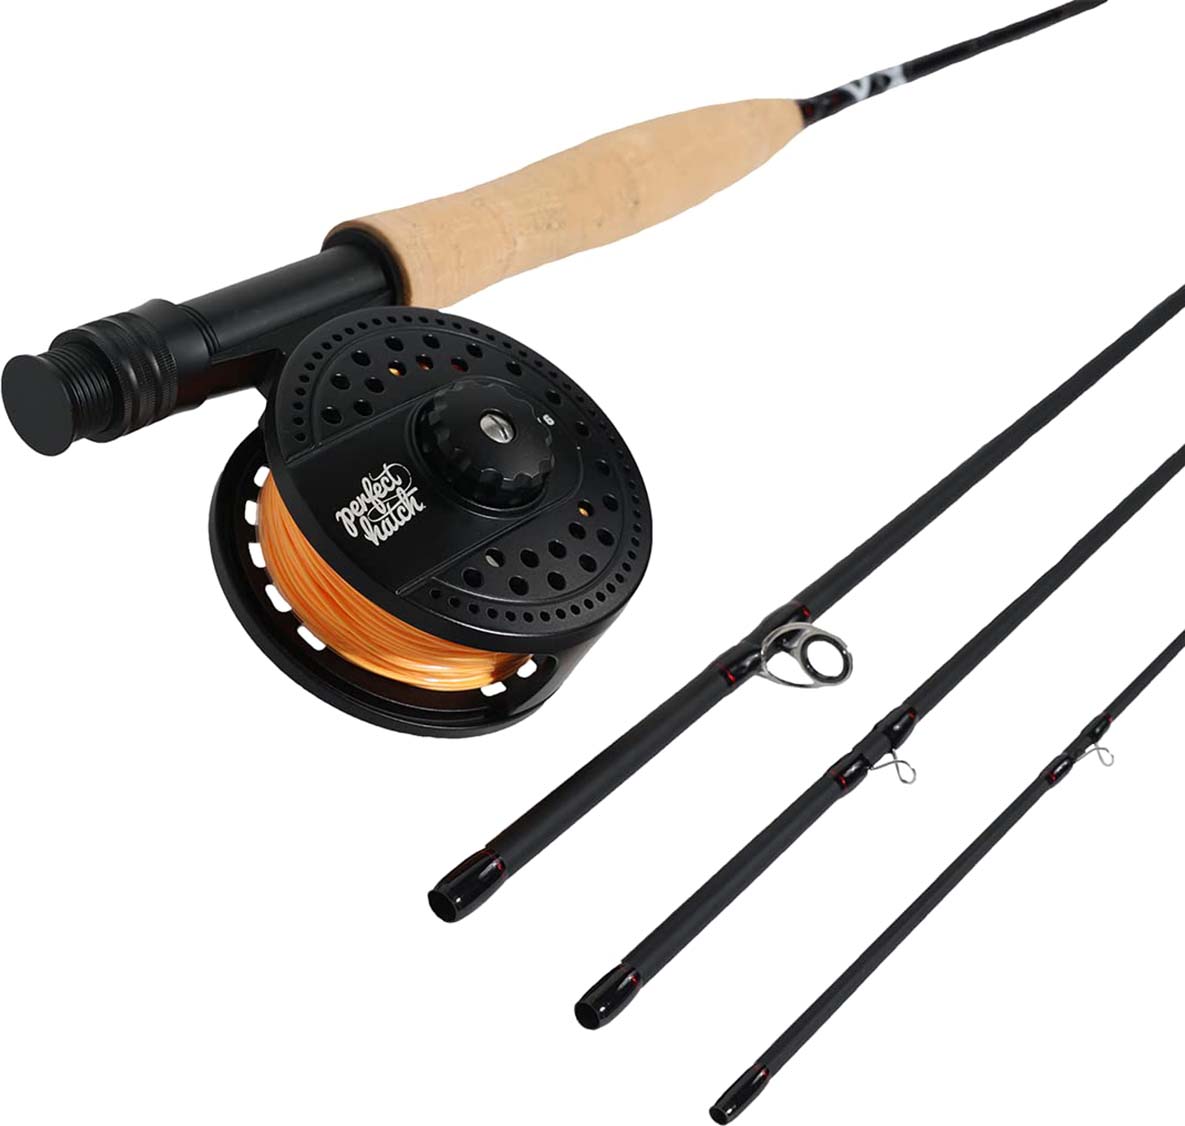 https://cs1.0ps.us/original/opplanet-perfect-hatch-fly-rod-combo-w-line-8ft-6in-3-4-wt-ph-combo-8634-4-main